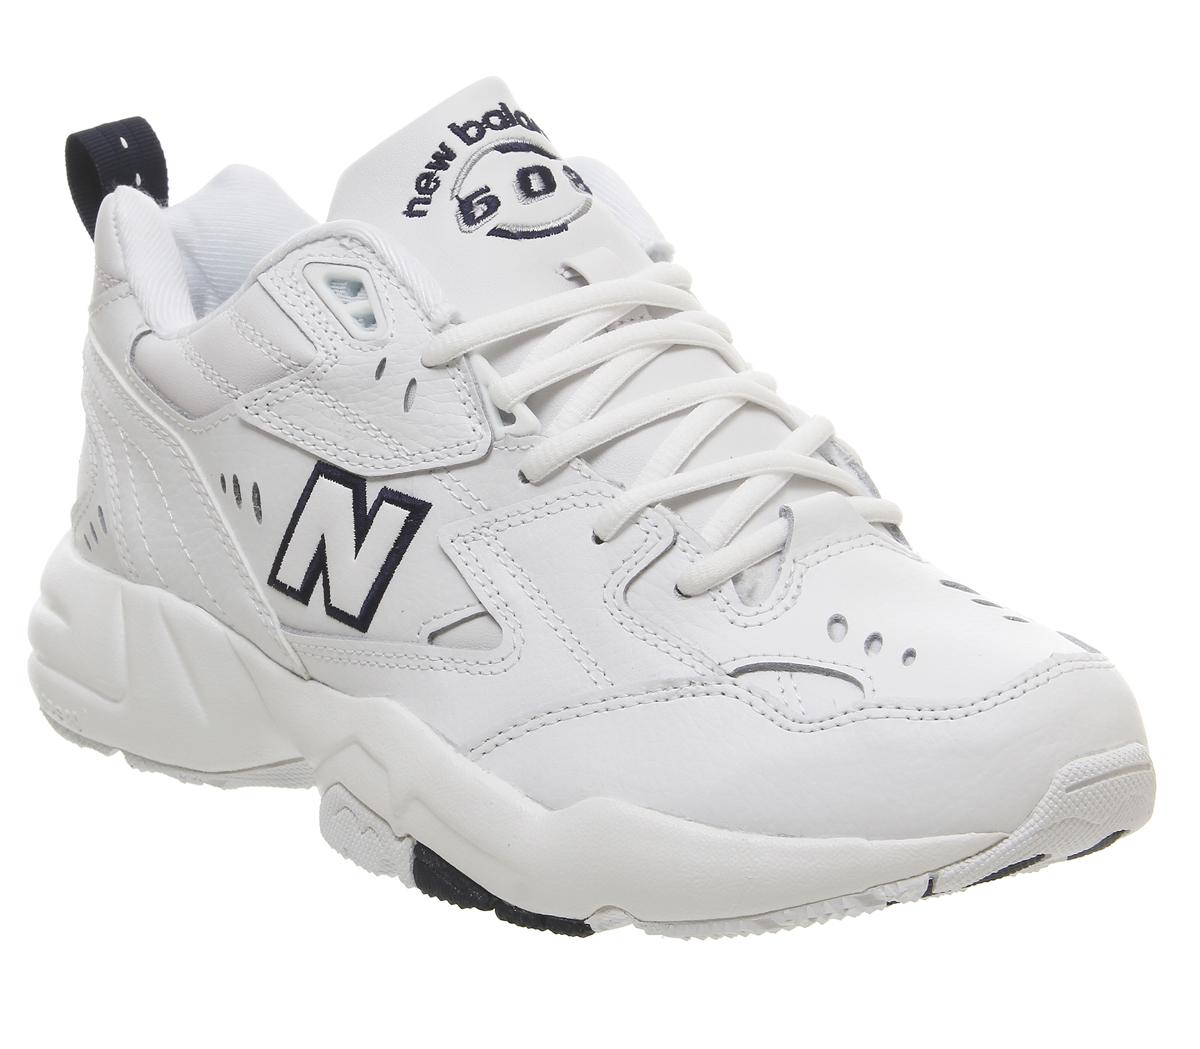 New Balance 608 Trainers White Navy - His trainers